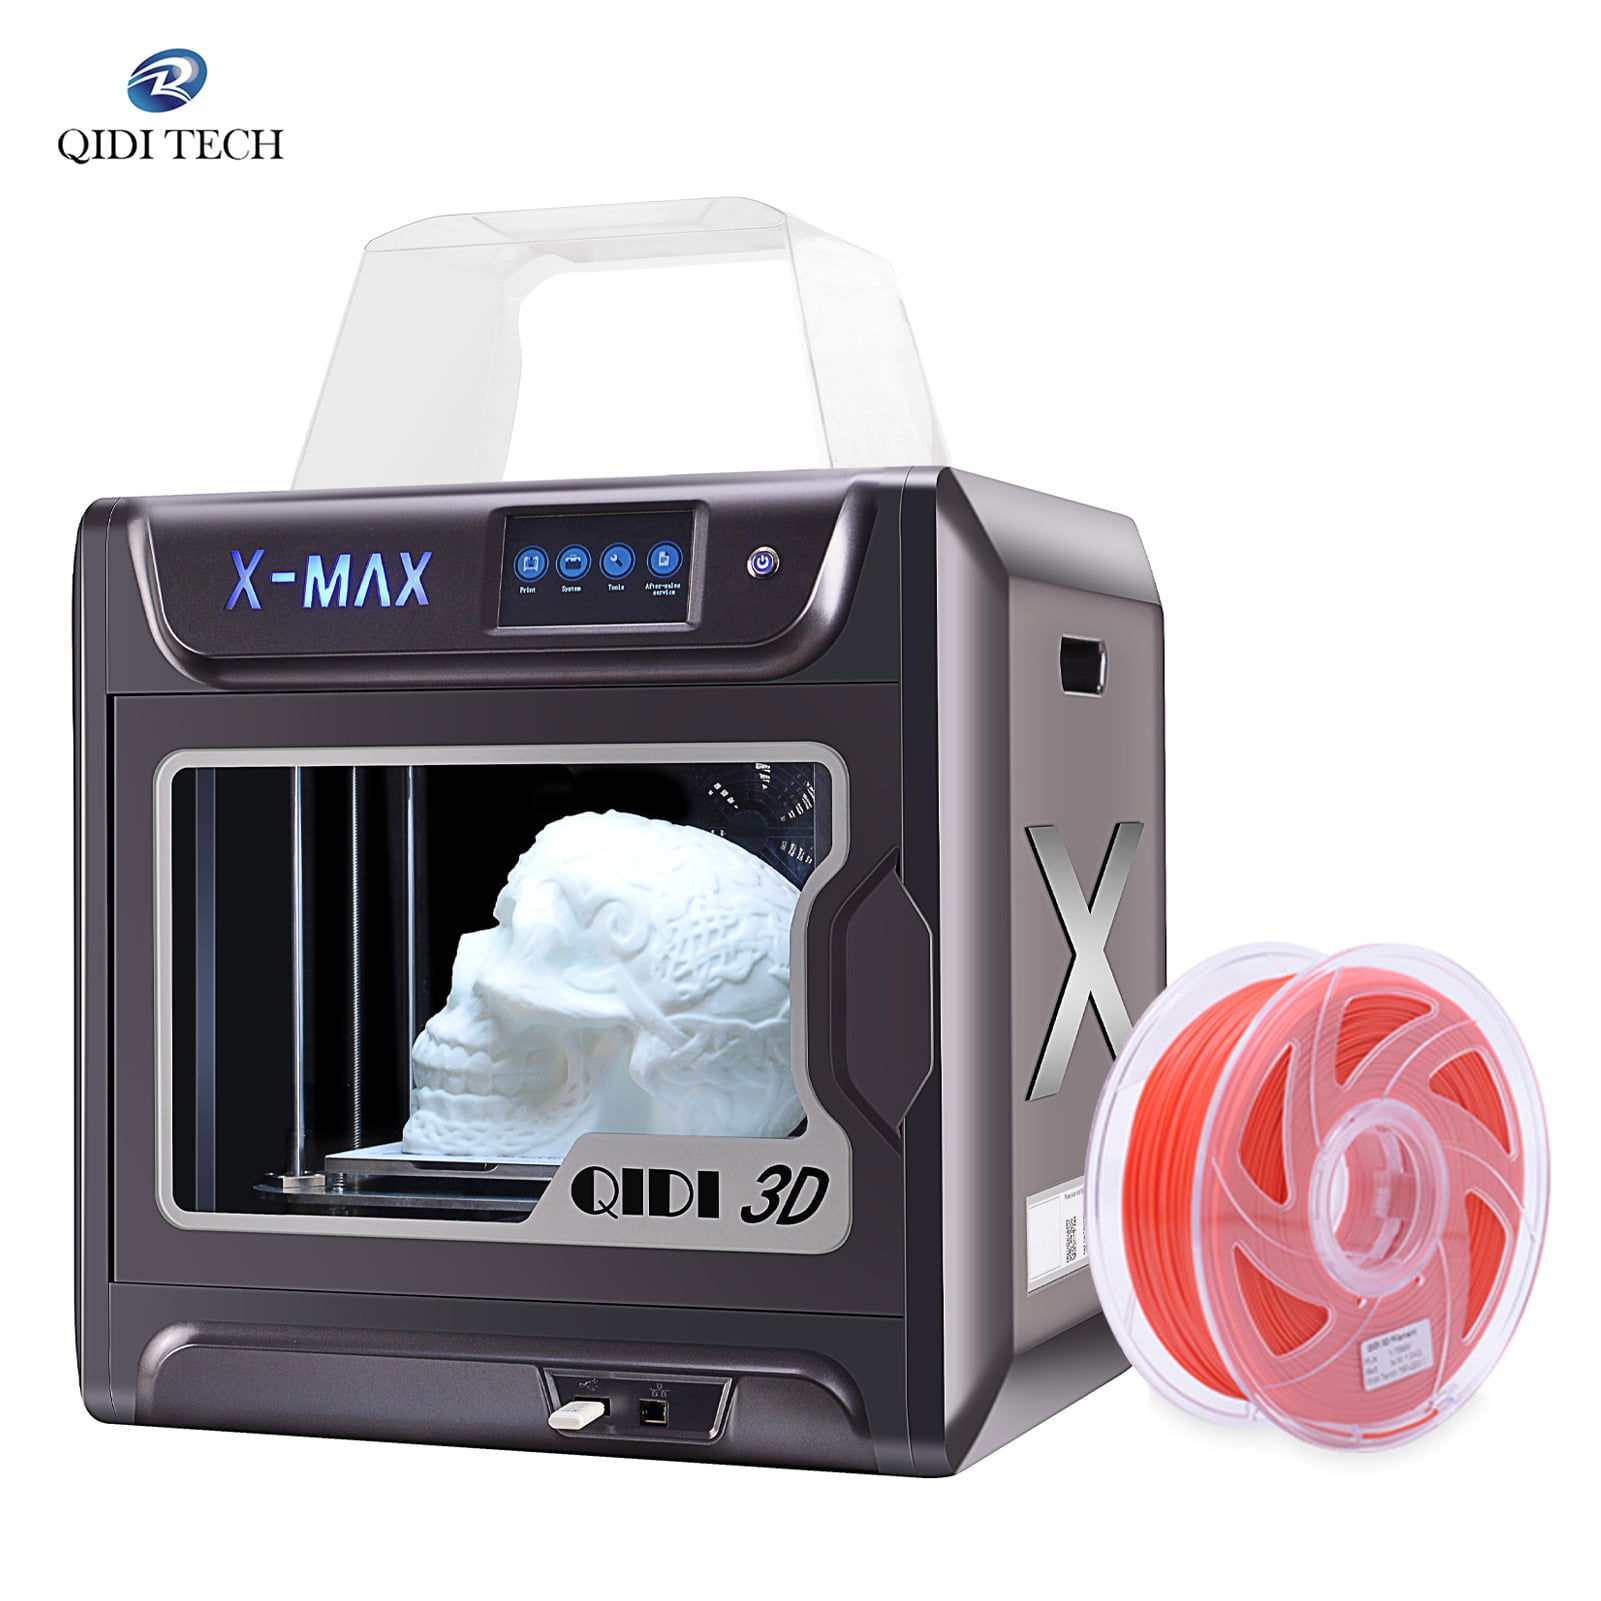 QIDI TECH Large Size Intelligent Industrial Grade 3D Printer New Model:X-max,5 Inch Touchscreen,WiFi Function,High Precision Printing with ABS,PLA,TPU,Flexible Filament,300x250x300mm 